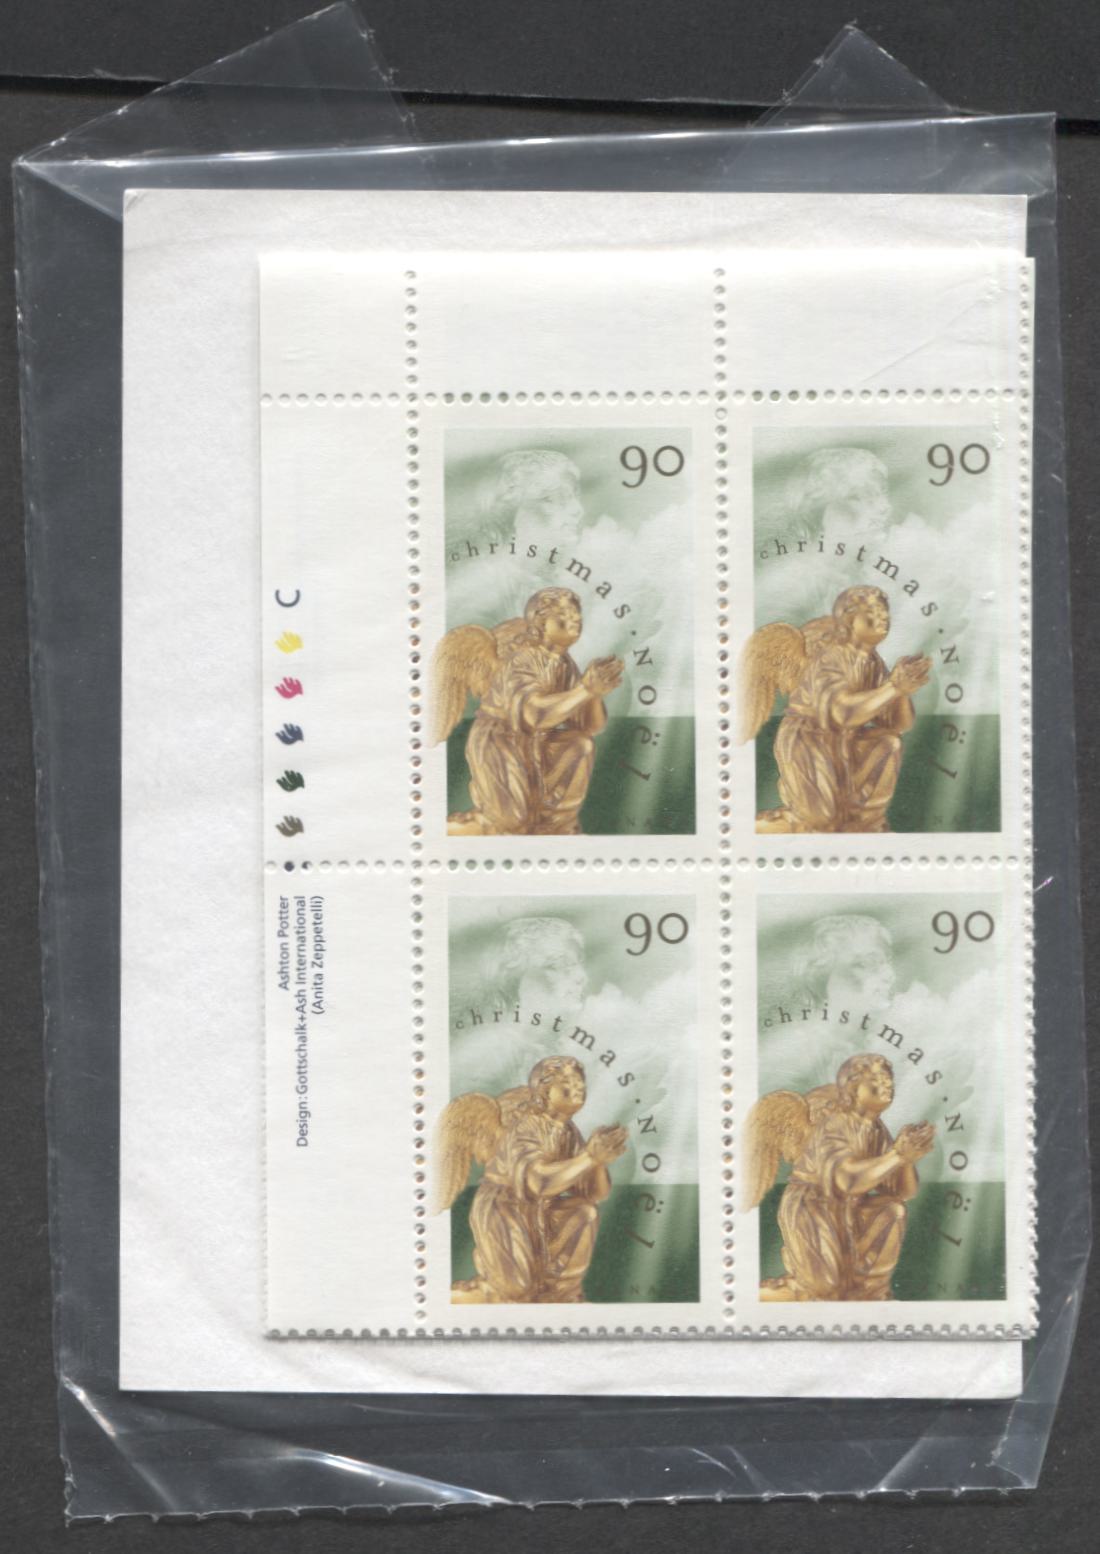 Lot 337 Canada #1766,ii 90c Multicolored Praying Angel 1998 Christmas, Canada Post Sealed Pack of Inscription Blocks on TRC Paper With HB Type 7A Insert Card, Includes Diagonal Scratch Under 'C' Variety, VFNH, Unitrade Cat. $45